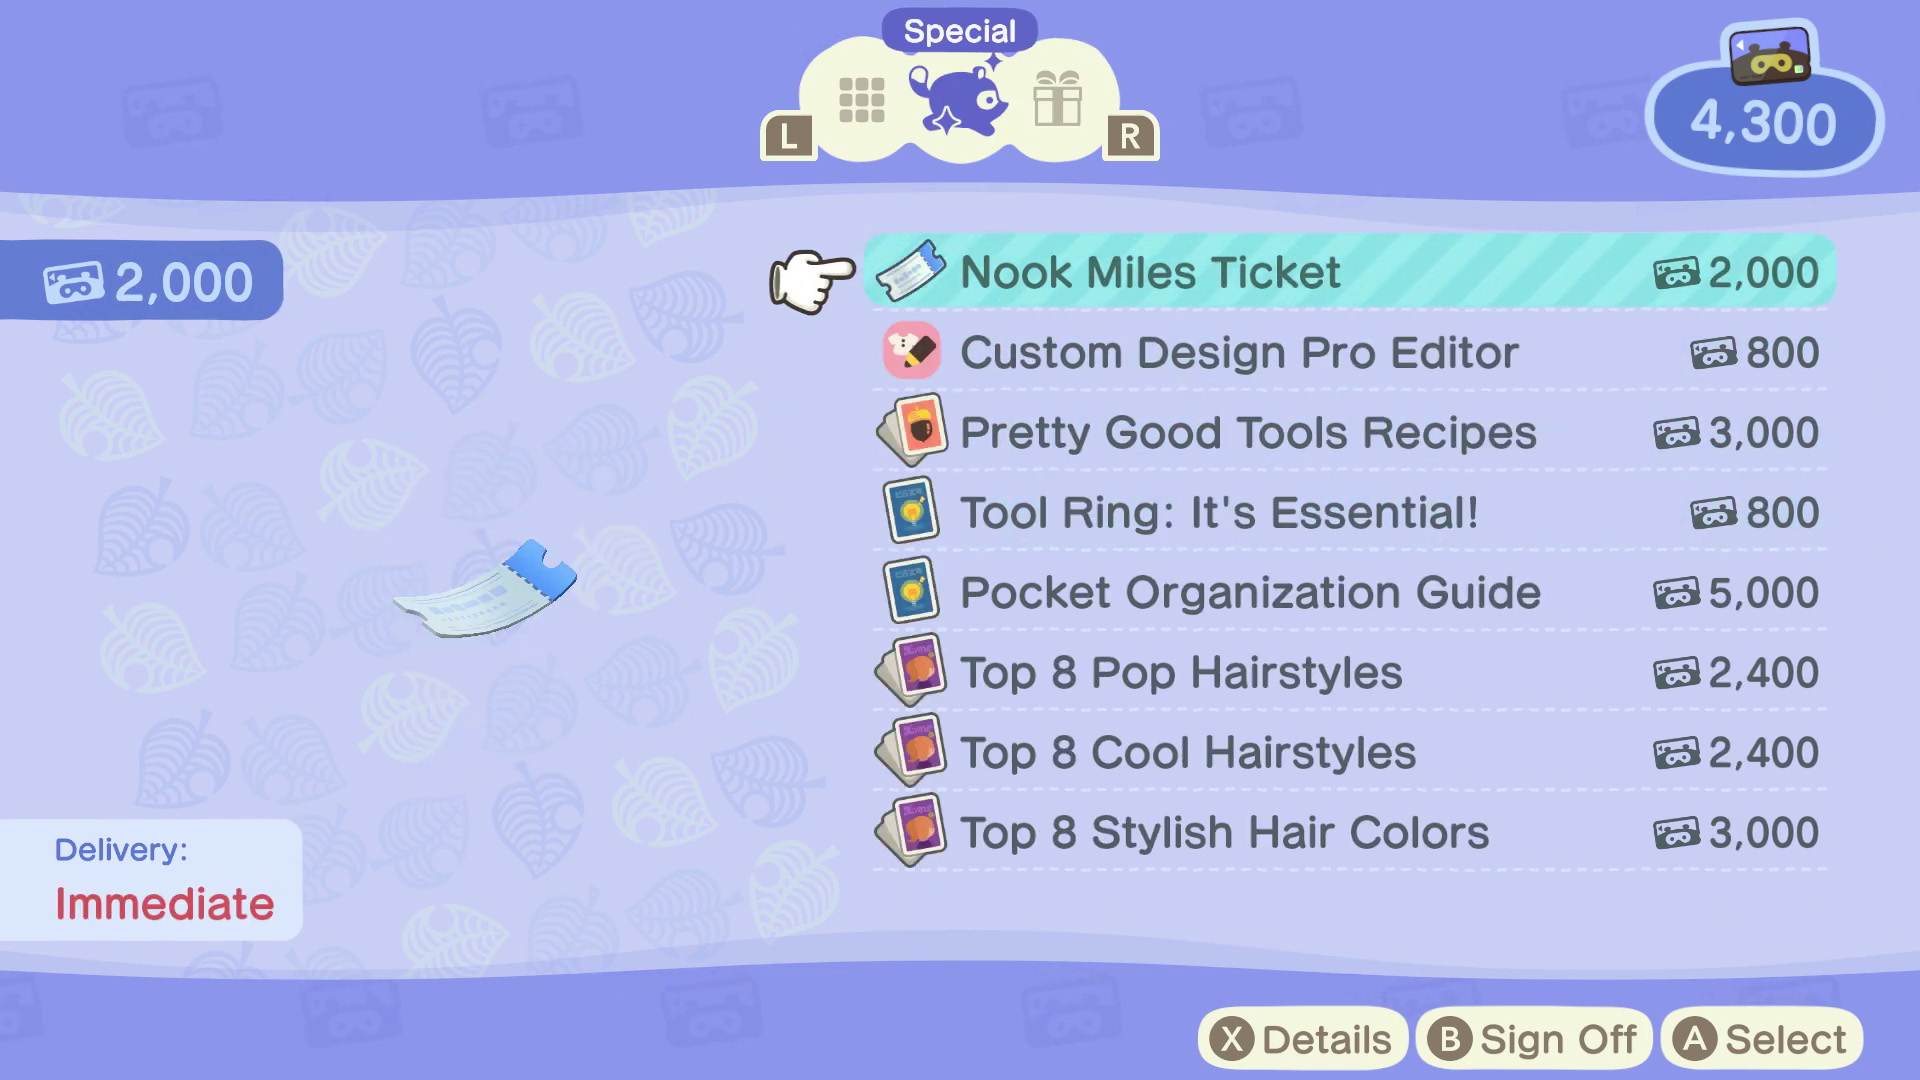 How To Get Iron Nuggets For Crafting Tools Nook S Cranny In Animal Crossing New Horizons - cute hair codes roblox how to use cheat engine to get